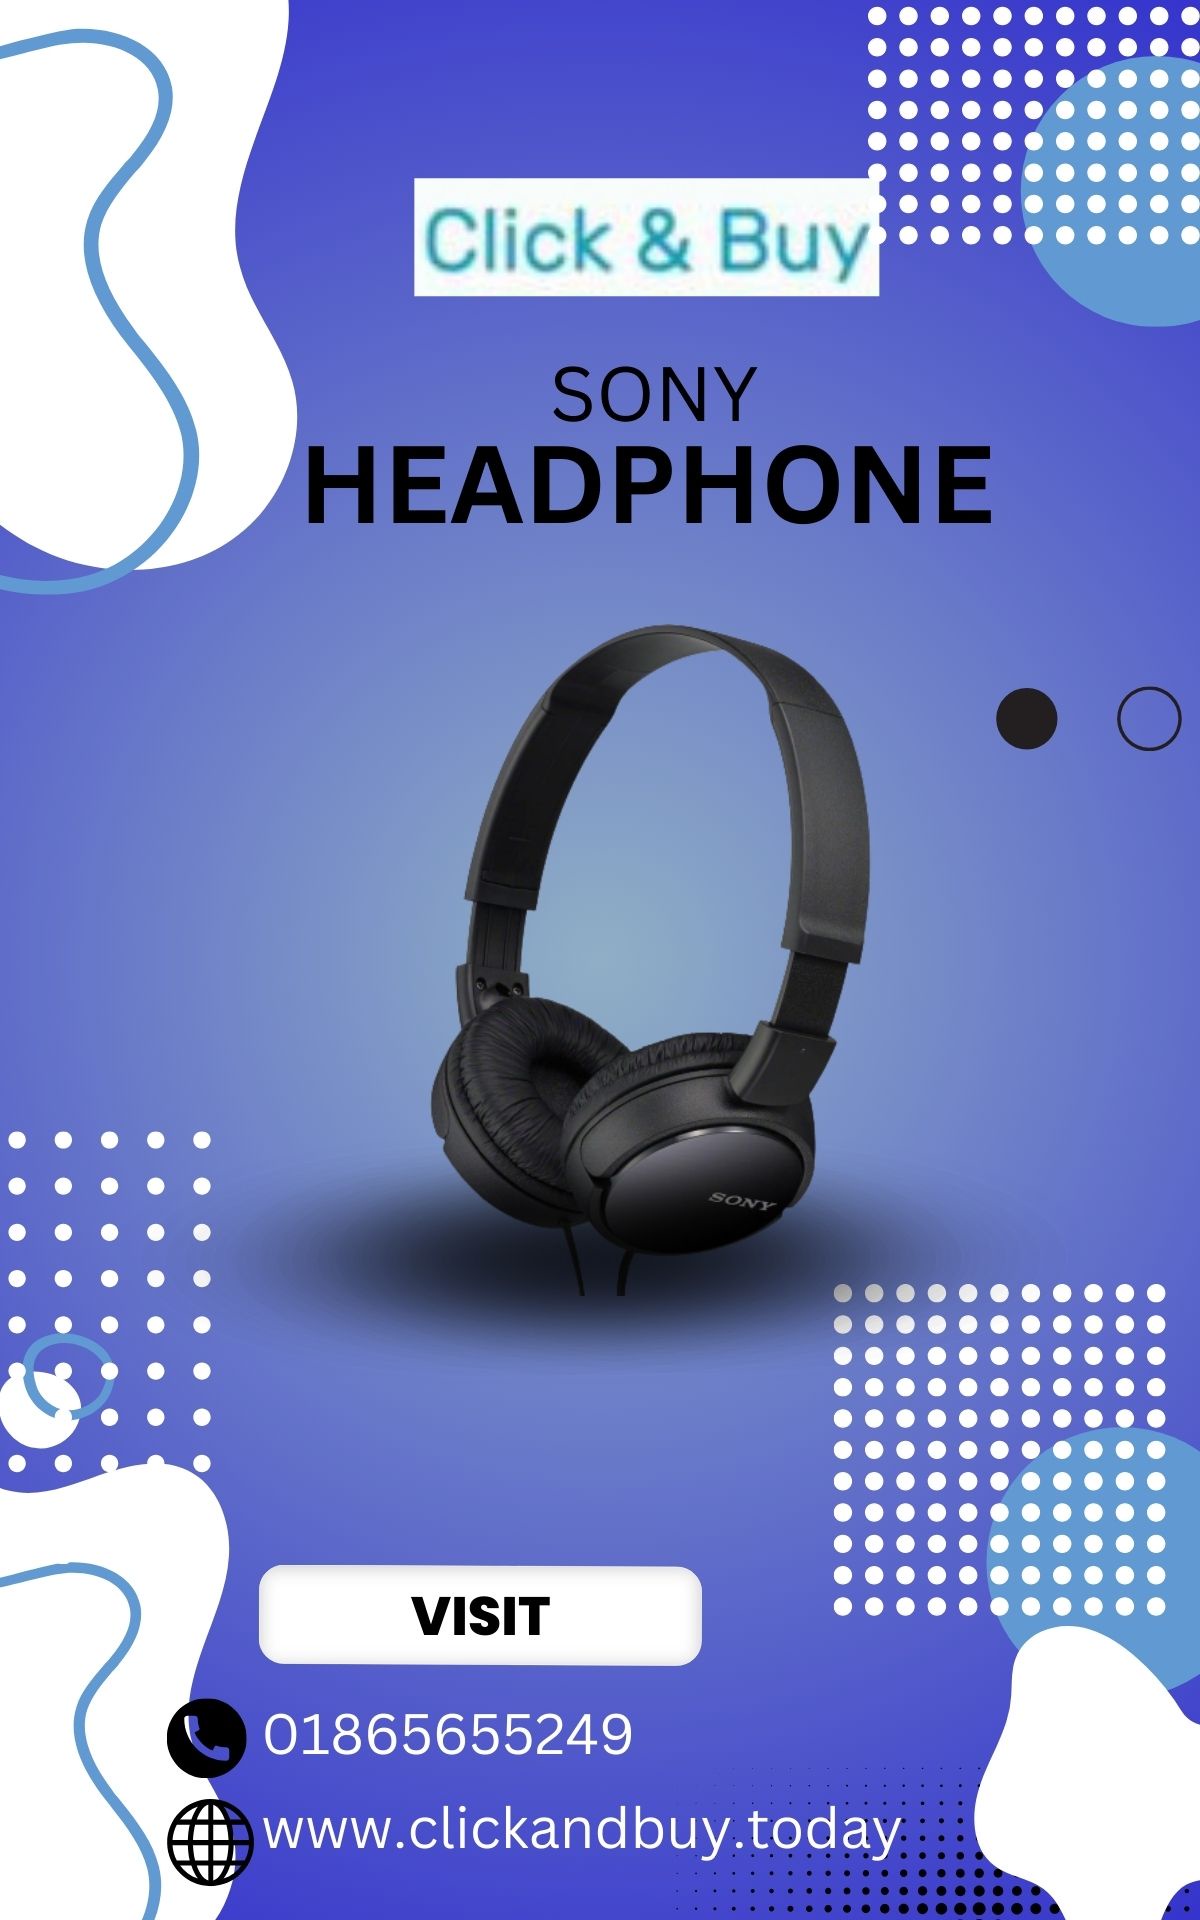 Explore your Sony headphones online world at click and buy